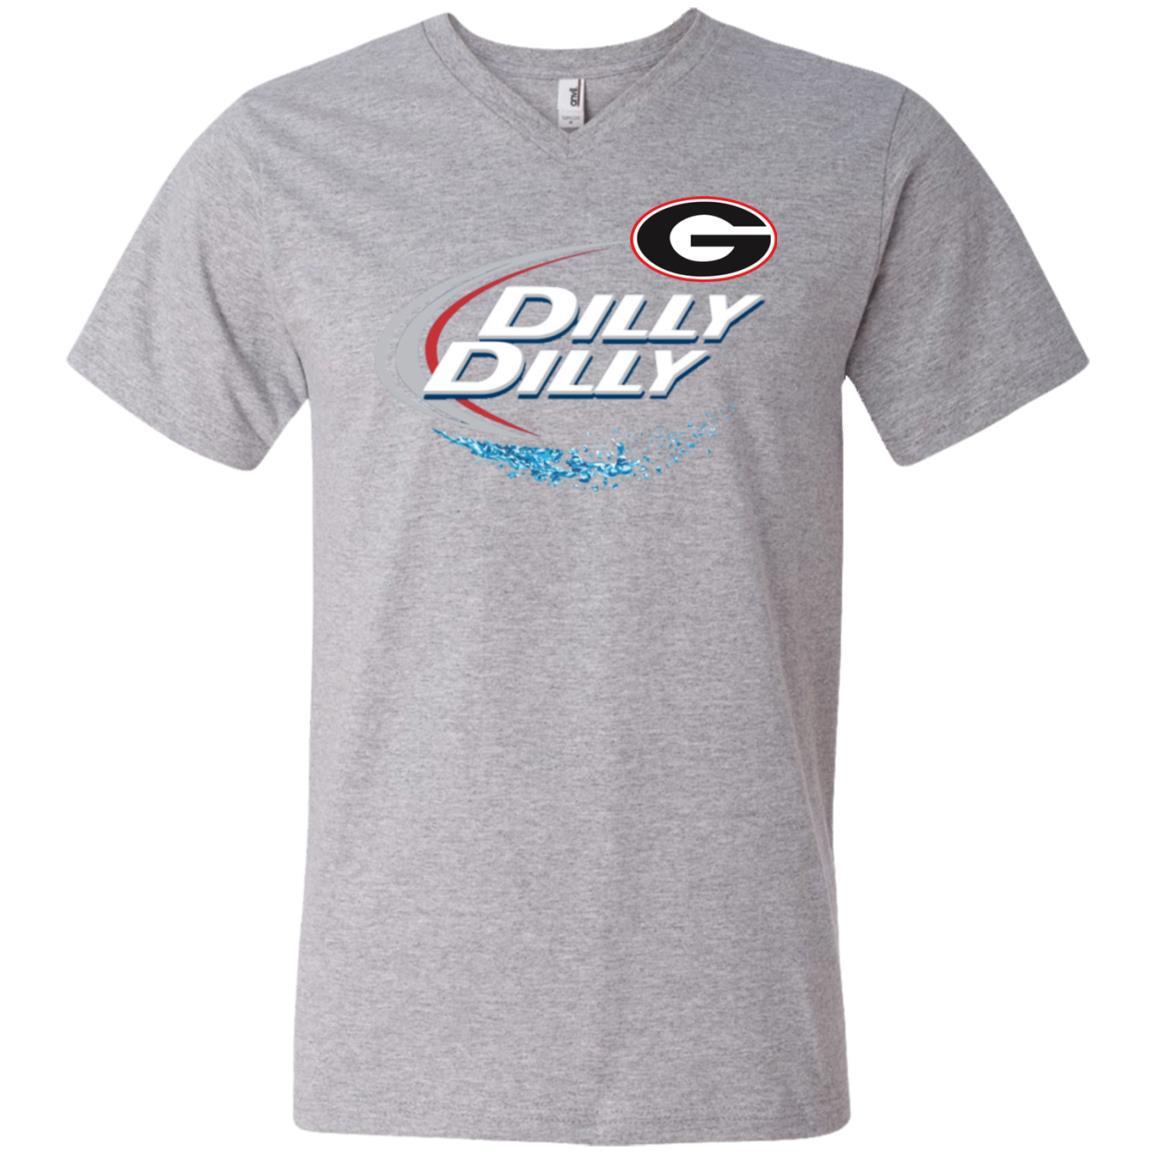 Funny Dilly Dilly Georgia Bulldogs Nfl S T-shirt